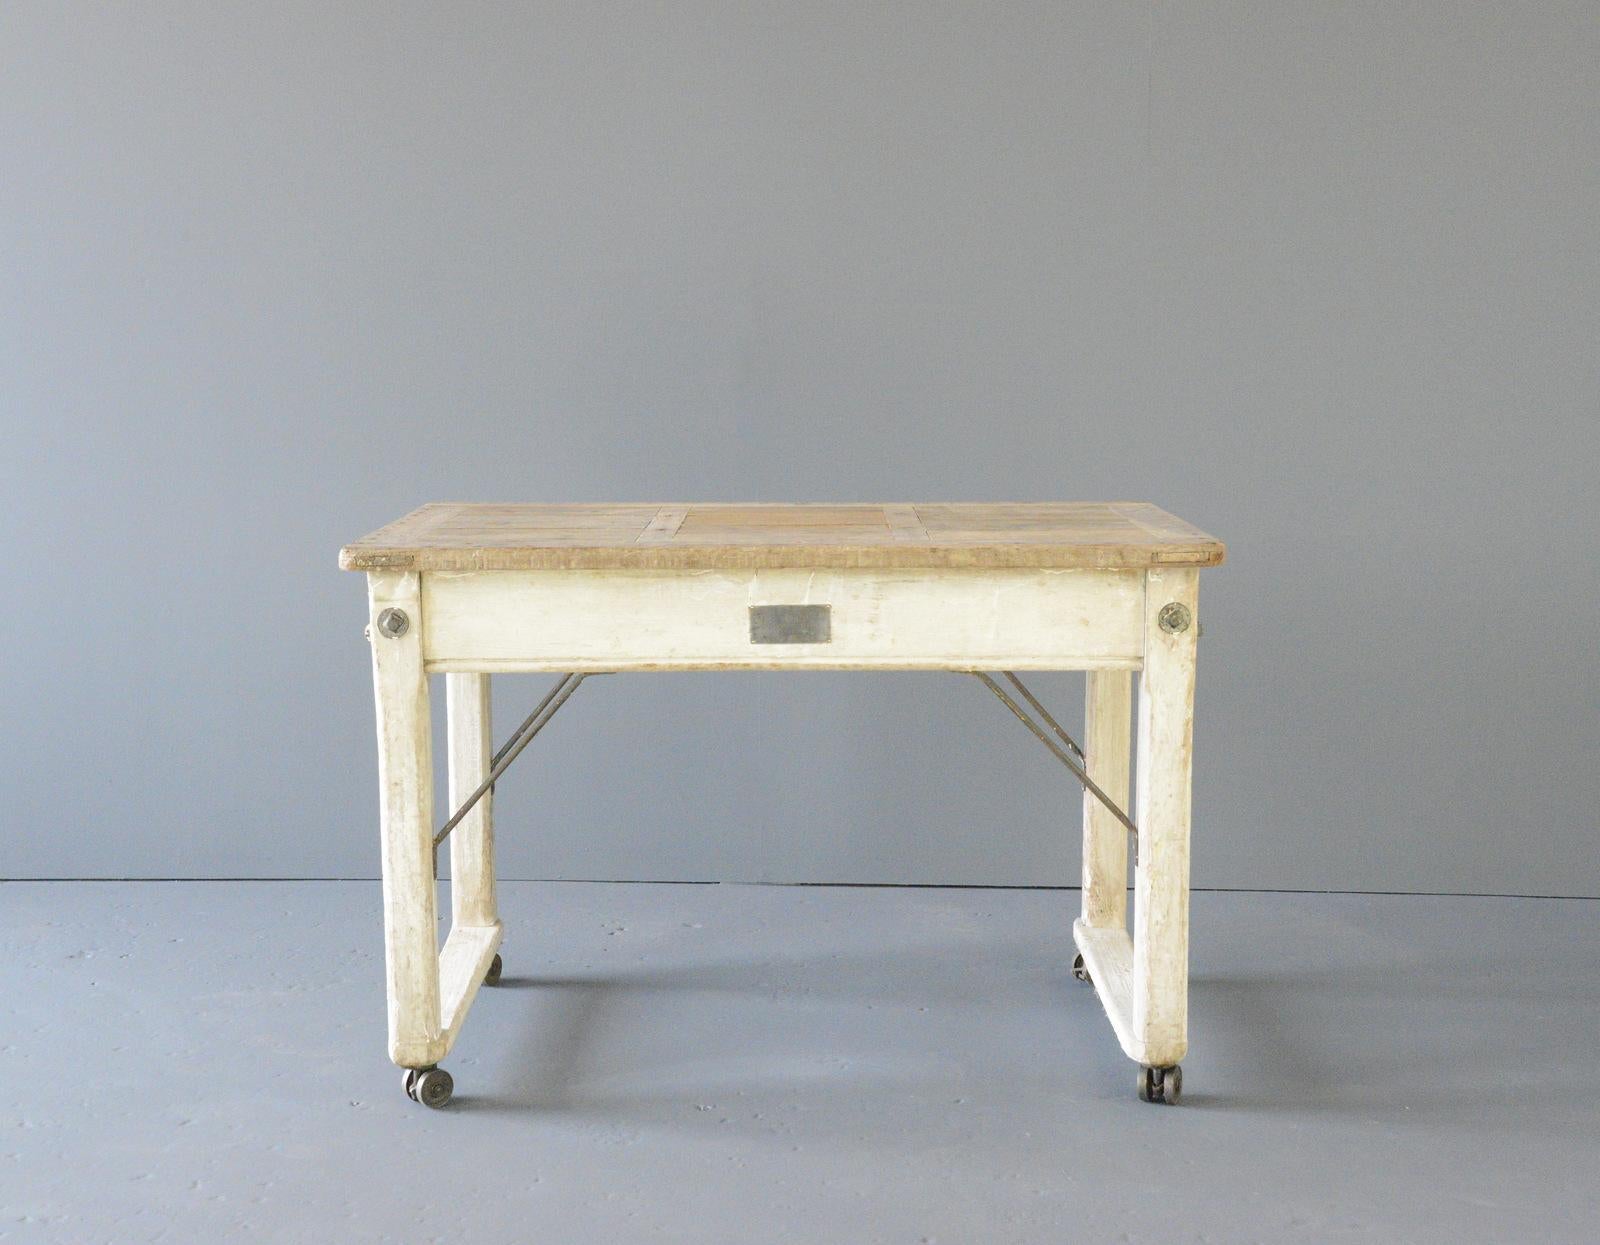 Early 20th Bakers Table TH Tonge circa 1910

- White wash pine frame
- Pine top
- Cast iron Castors
- Made by T H Tonge, Manchester
- English ~ 1910
- 122cm long x 76cm deep x 82cm tall

Condition Report

Original patinated condition.